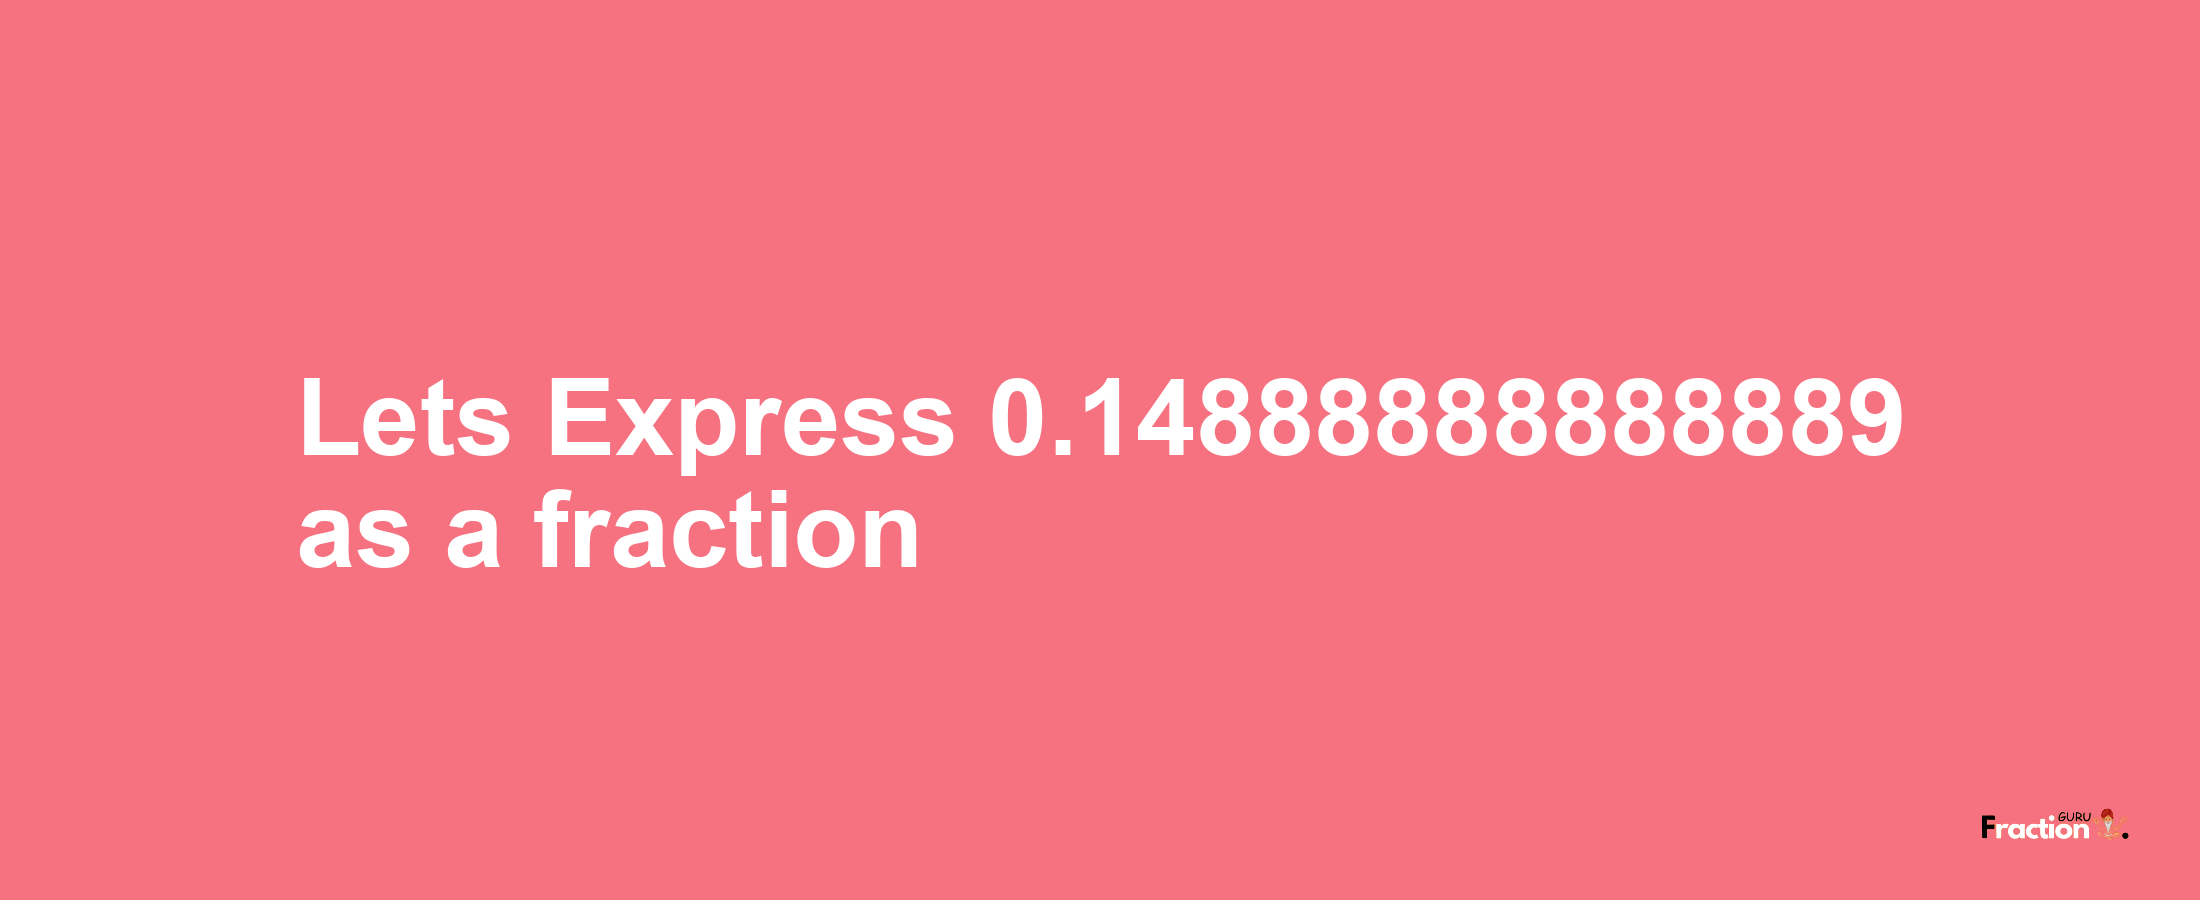 Lets Express 0.14888888888889 as afraction